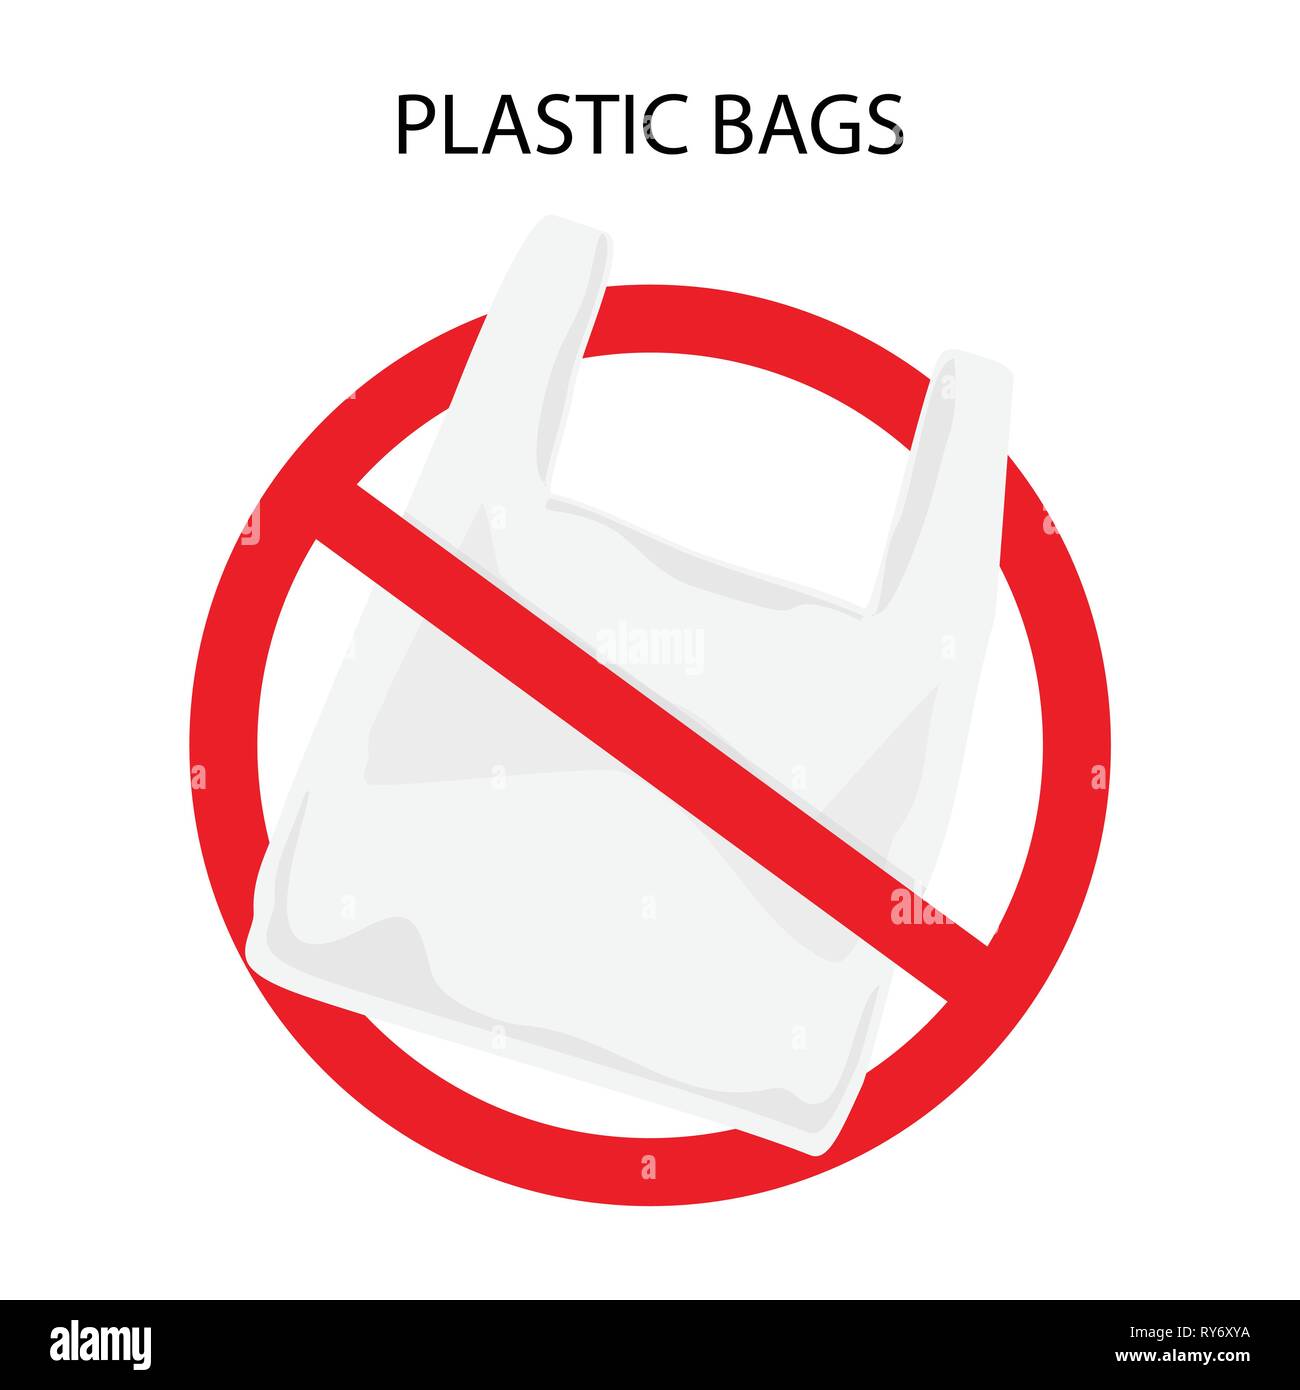 You should have not asked for a plastic carry bag! - The price of the  plastic -alternatives is not greater than plastic pollution - The Covai Mail